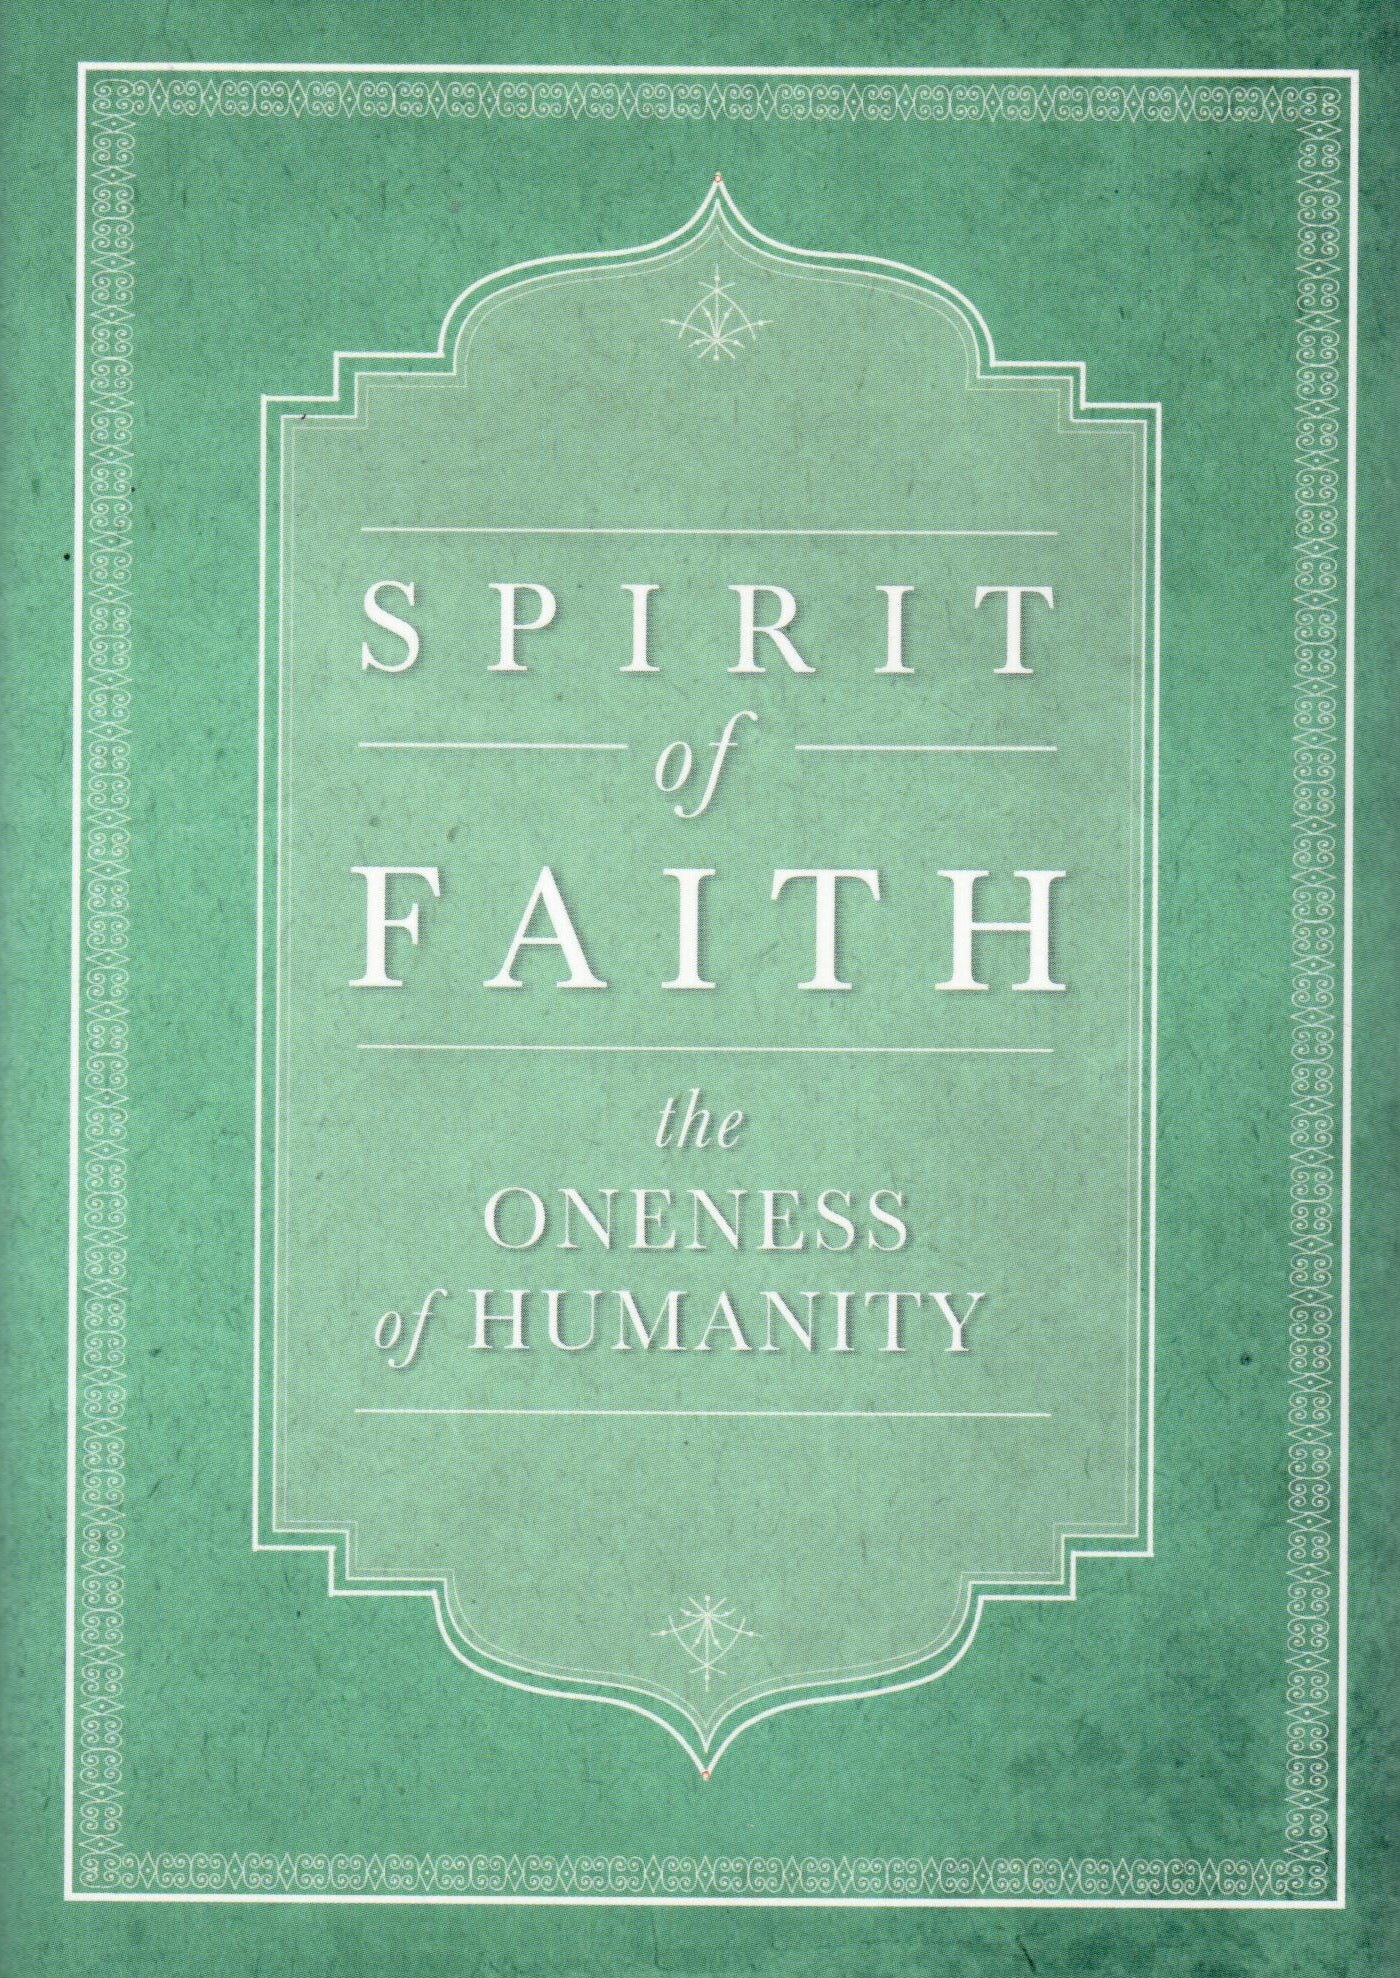 Spirit of Faith; the oneness of humanity